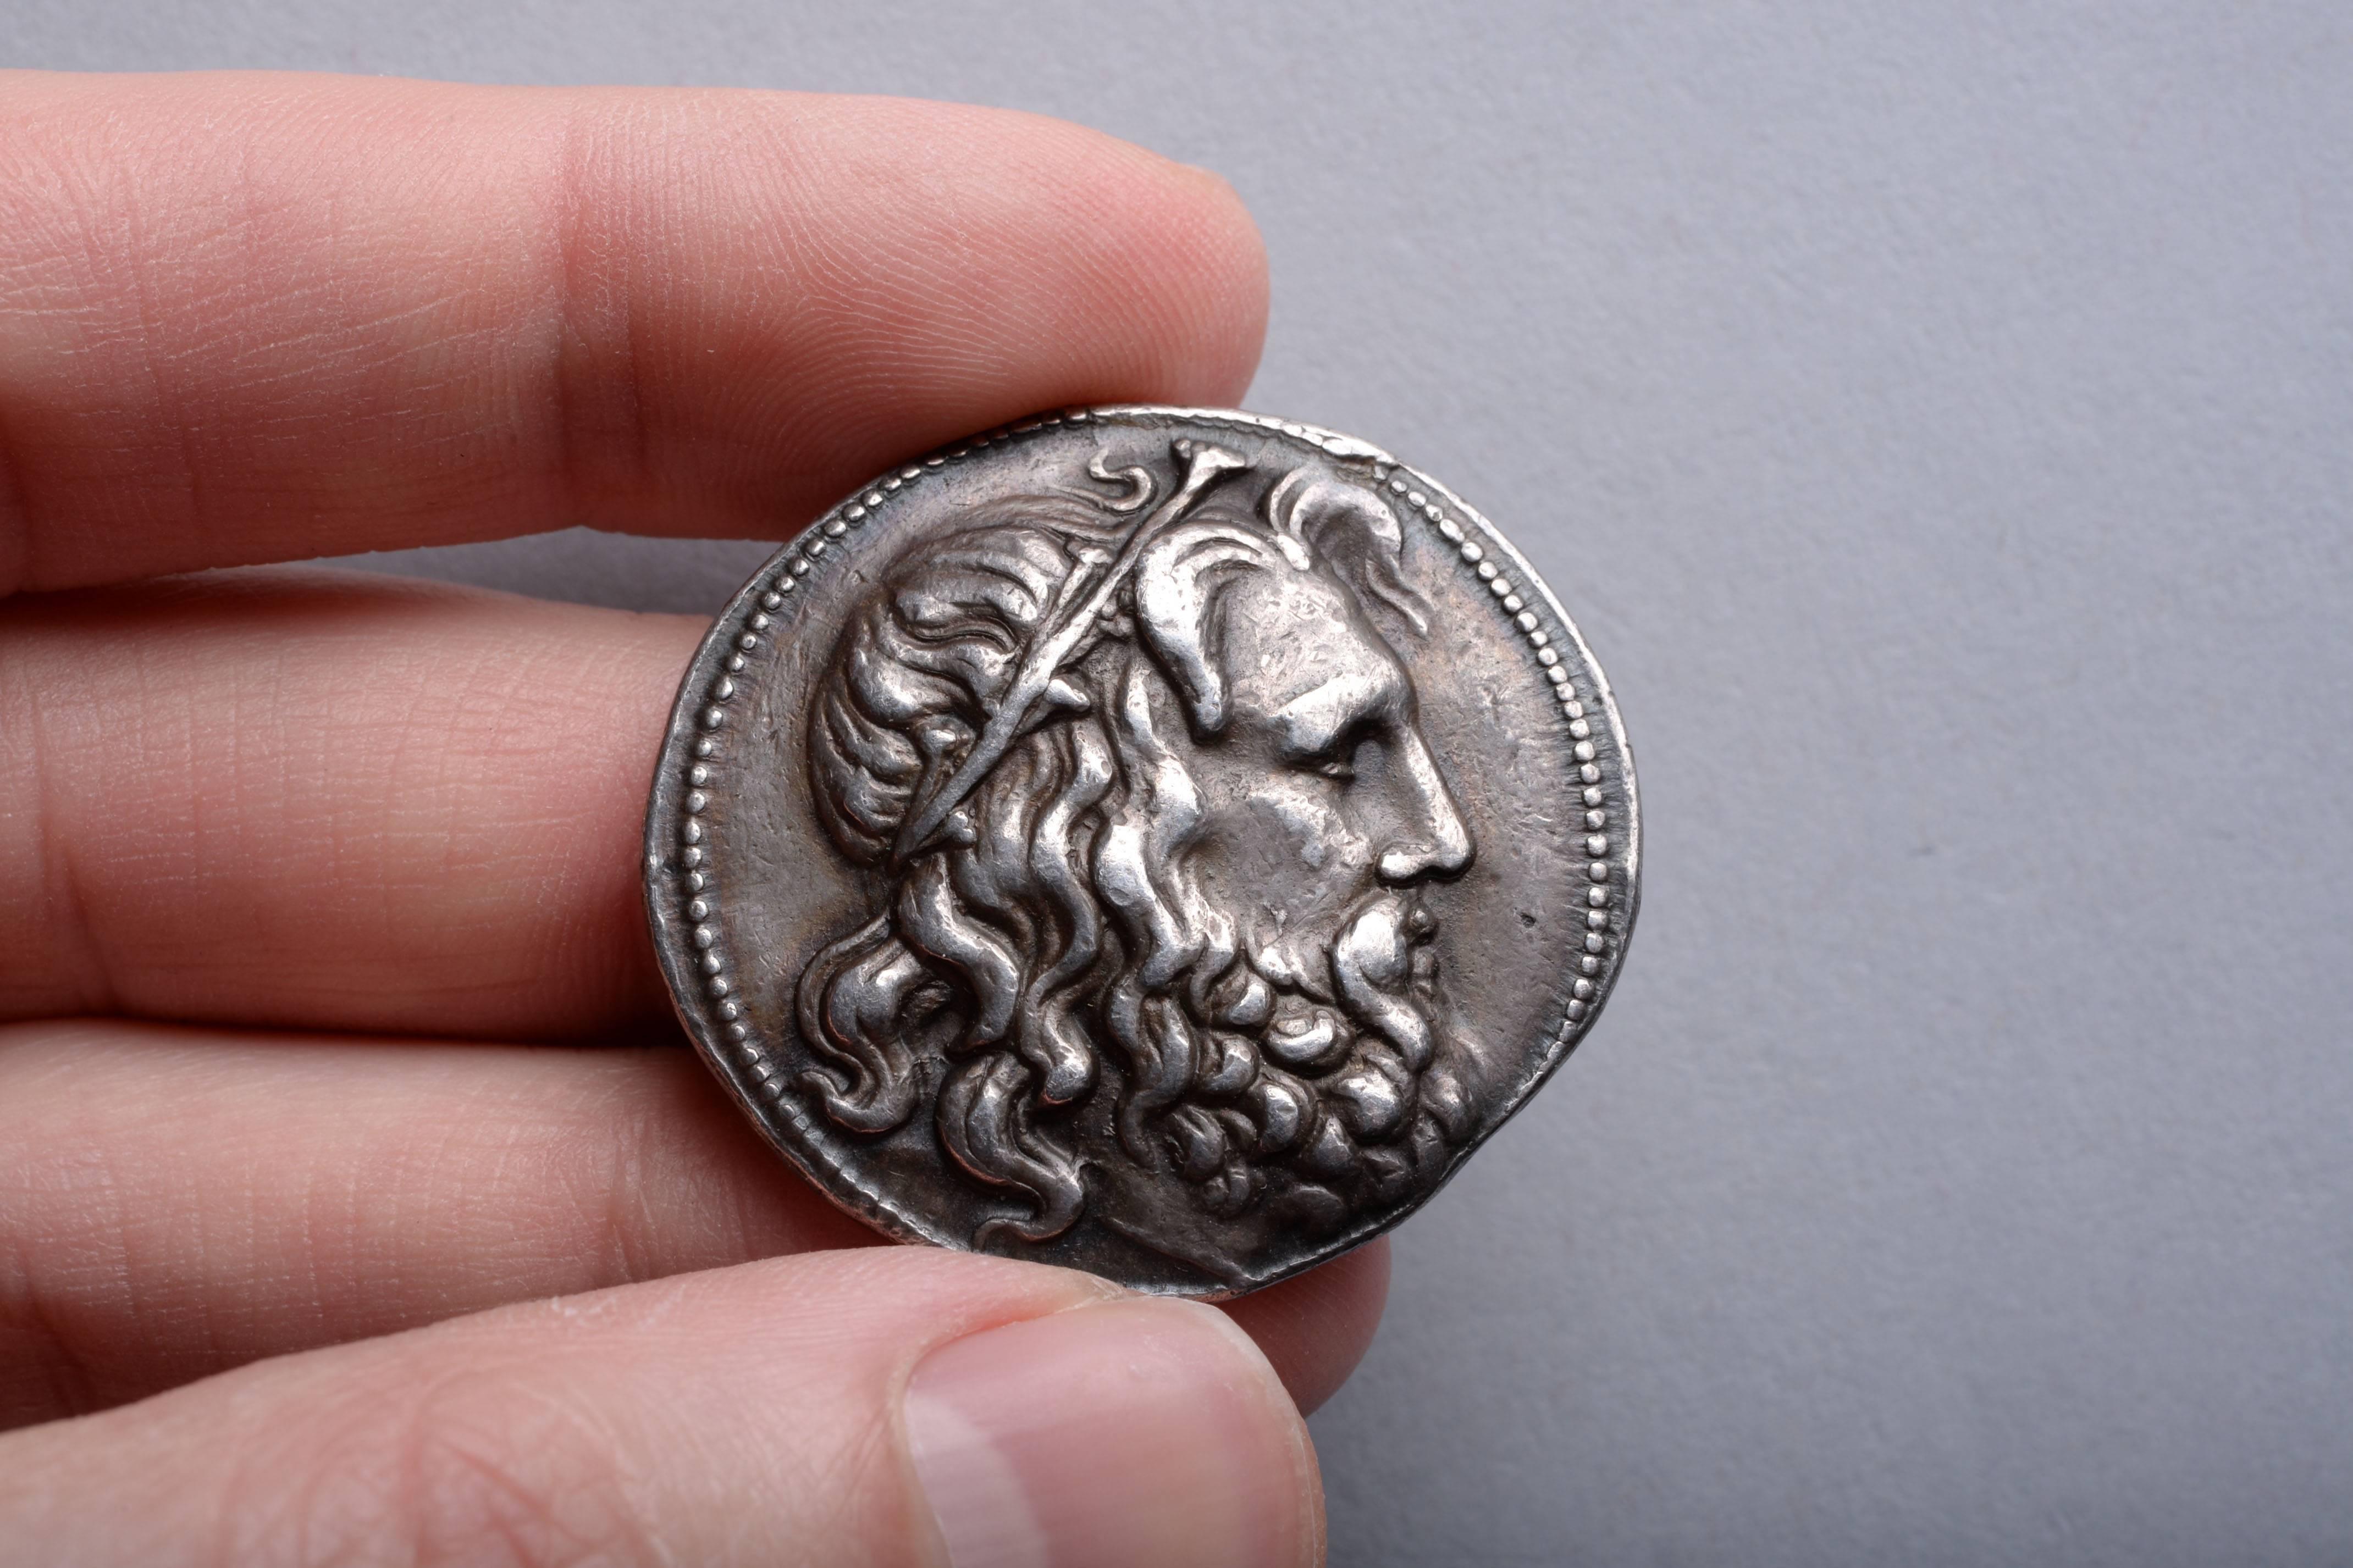 An impressive ancient Greek silver coin with a fantastic example of Hellenistic portraiture.

A tetradrachm minted under King Antigonos III Doson (